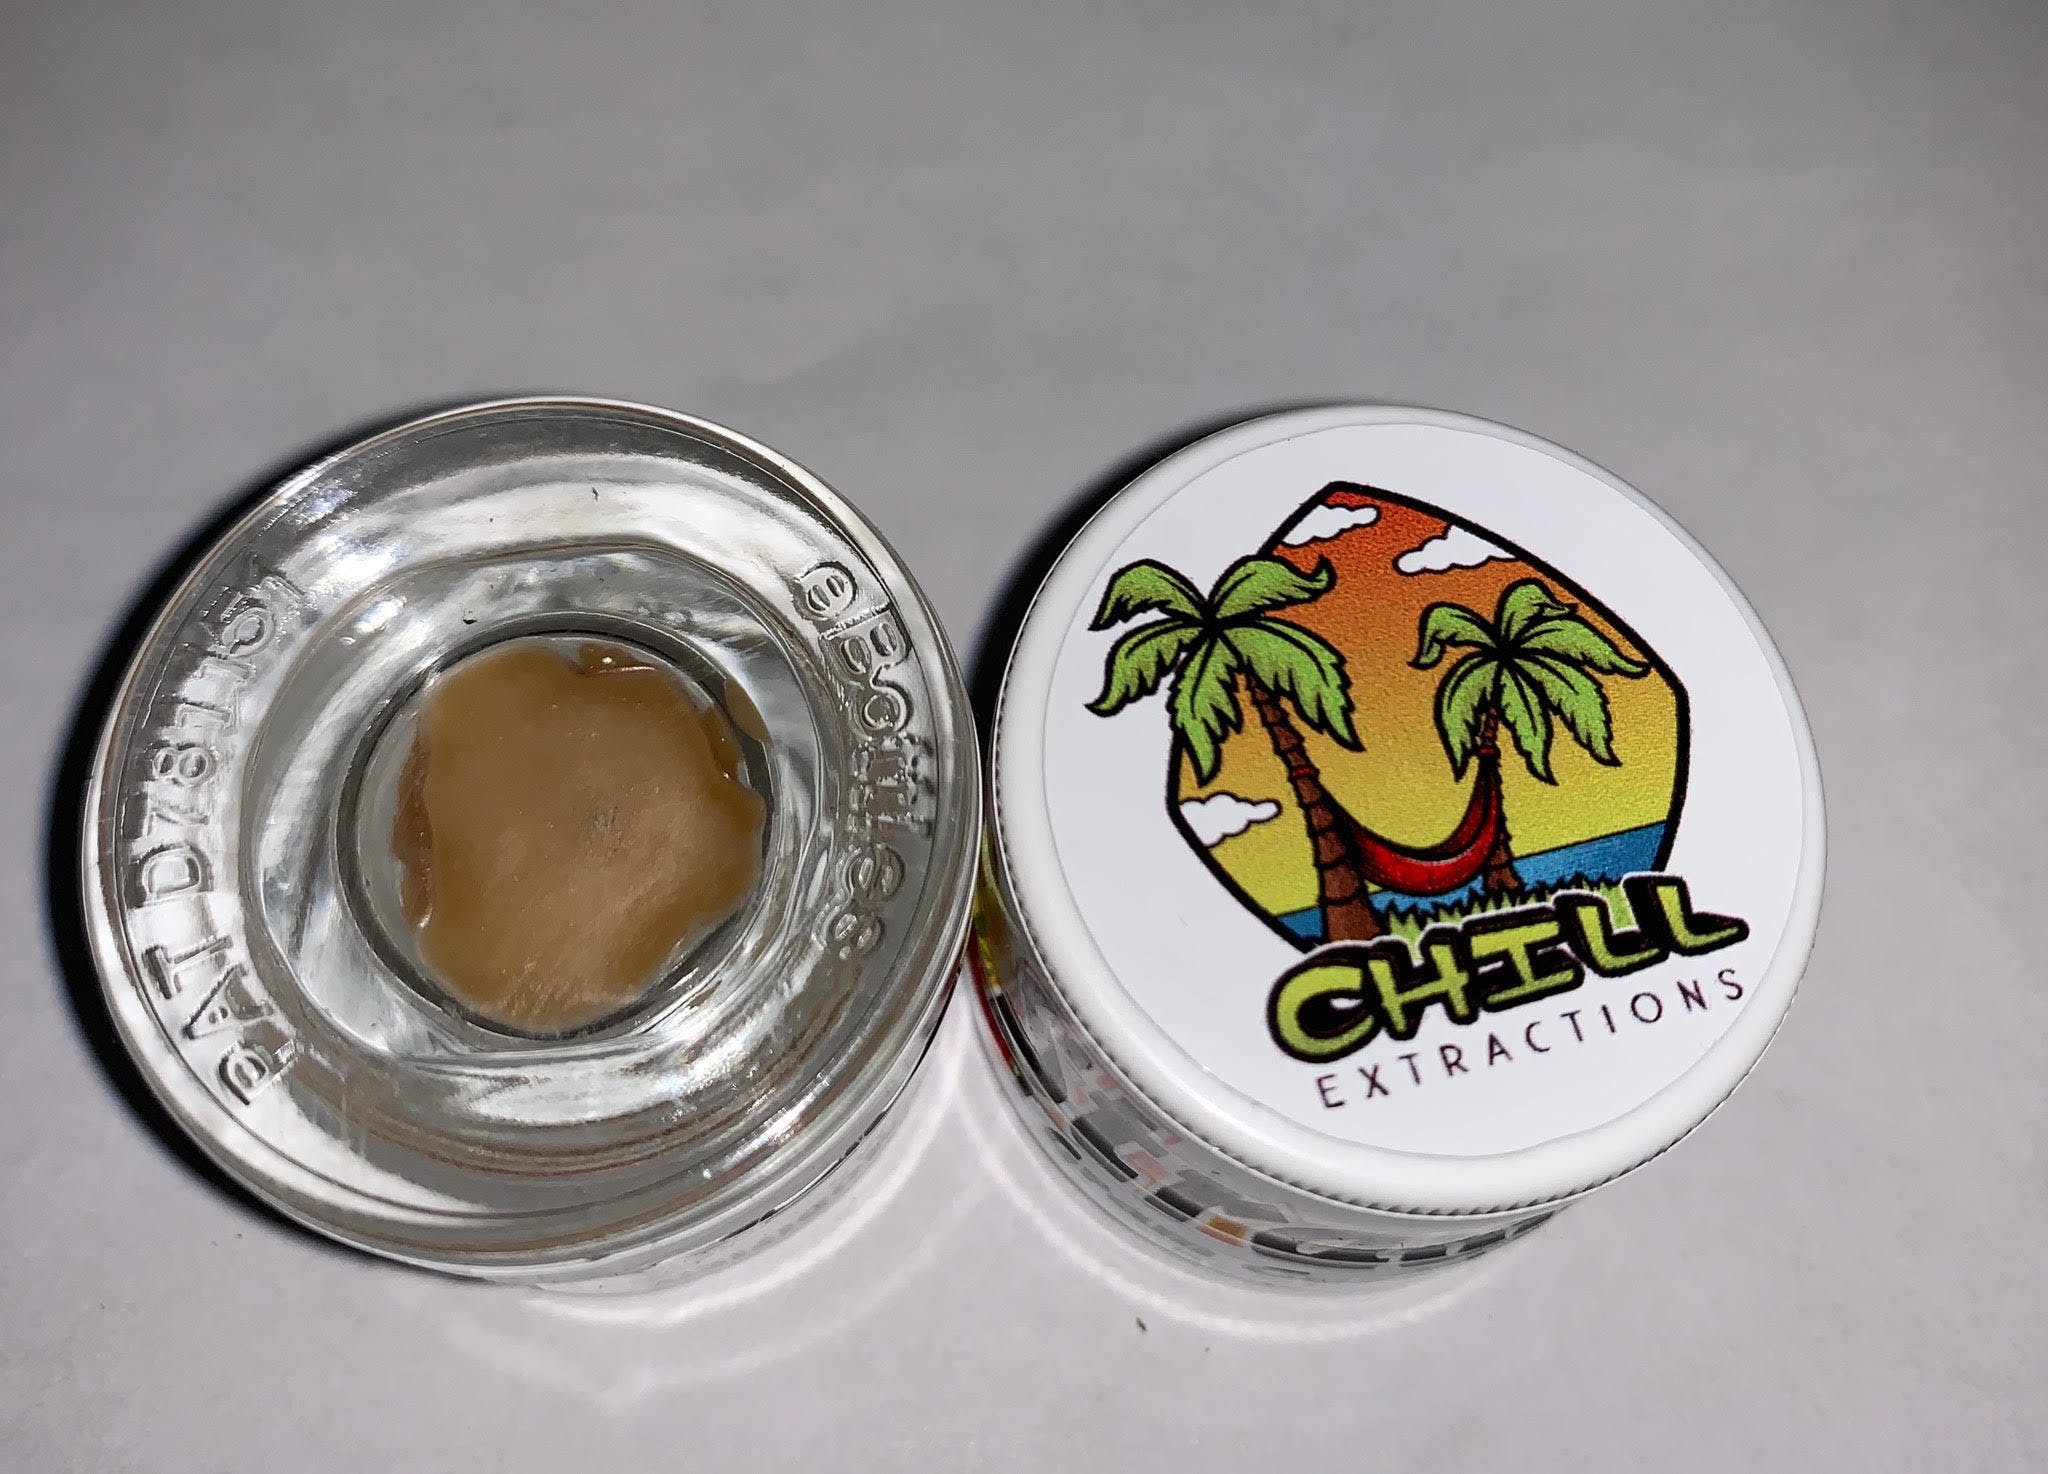 wax-strawnana-cured-resin-budder-by-chill-extractions-full-gram